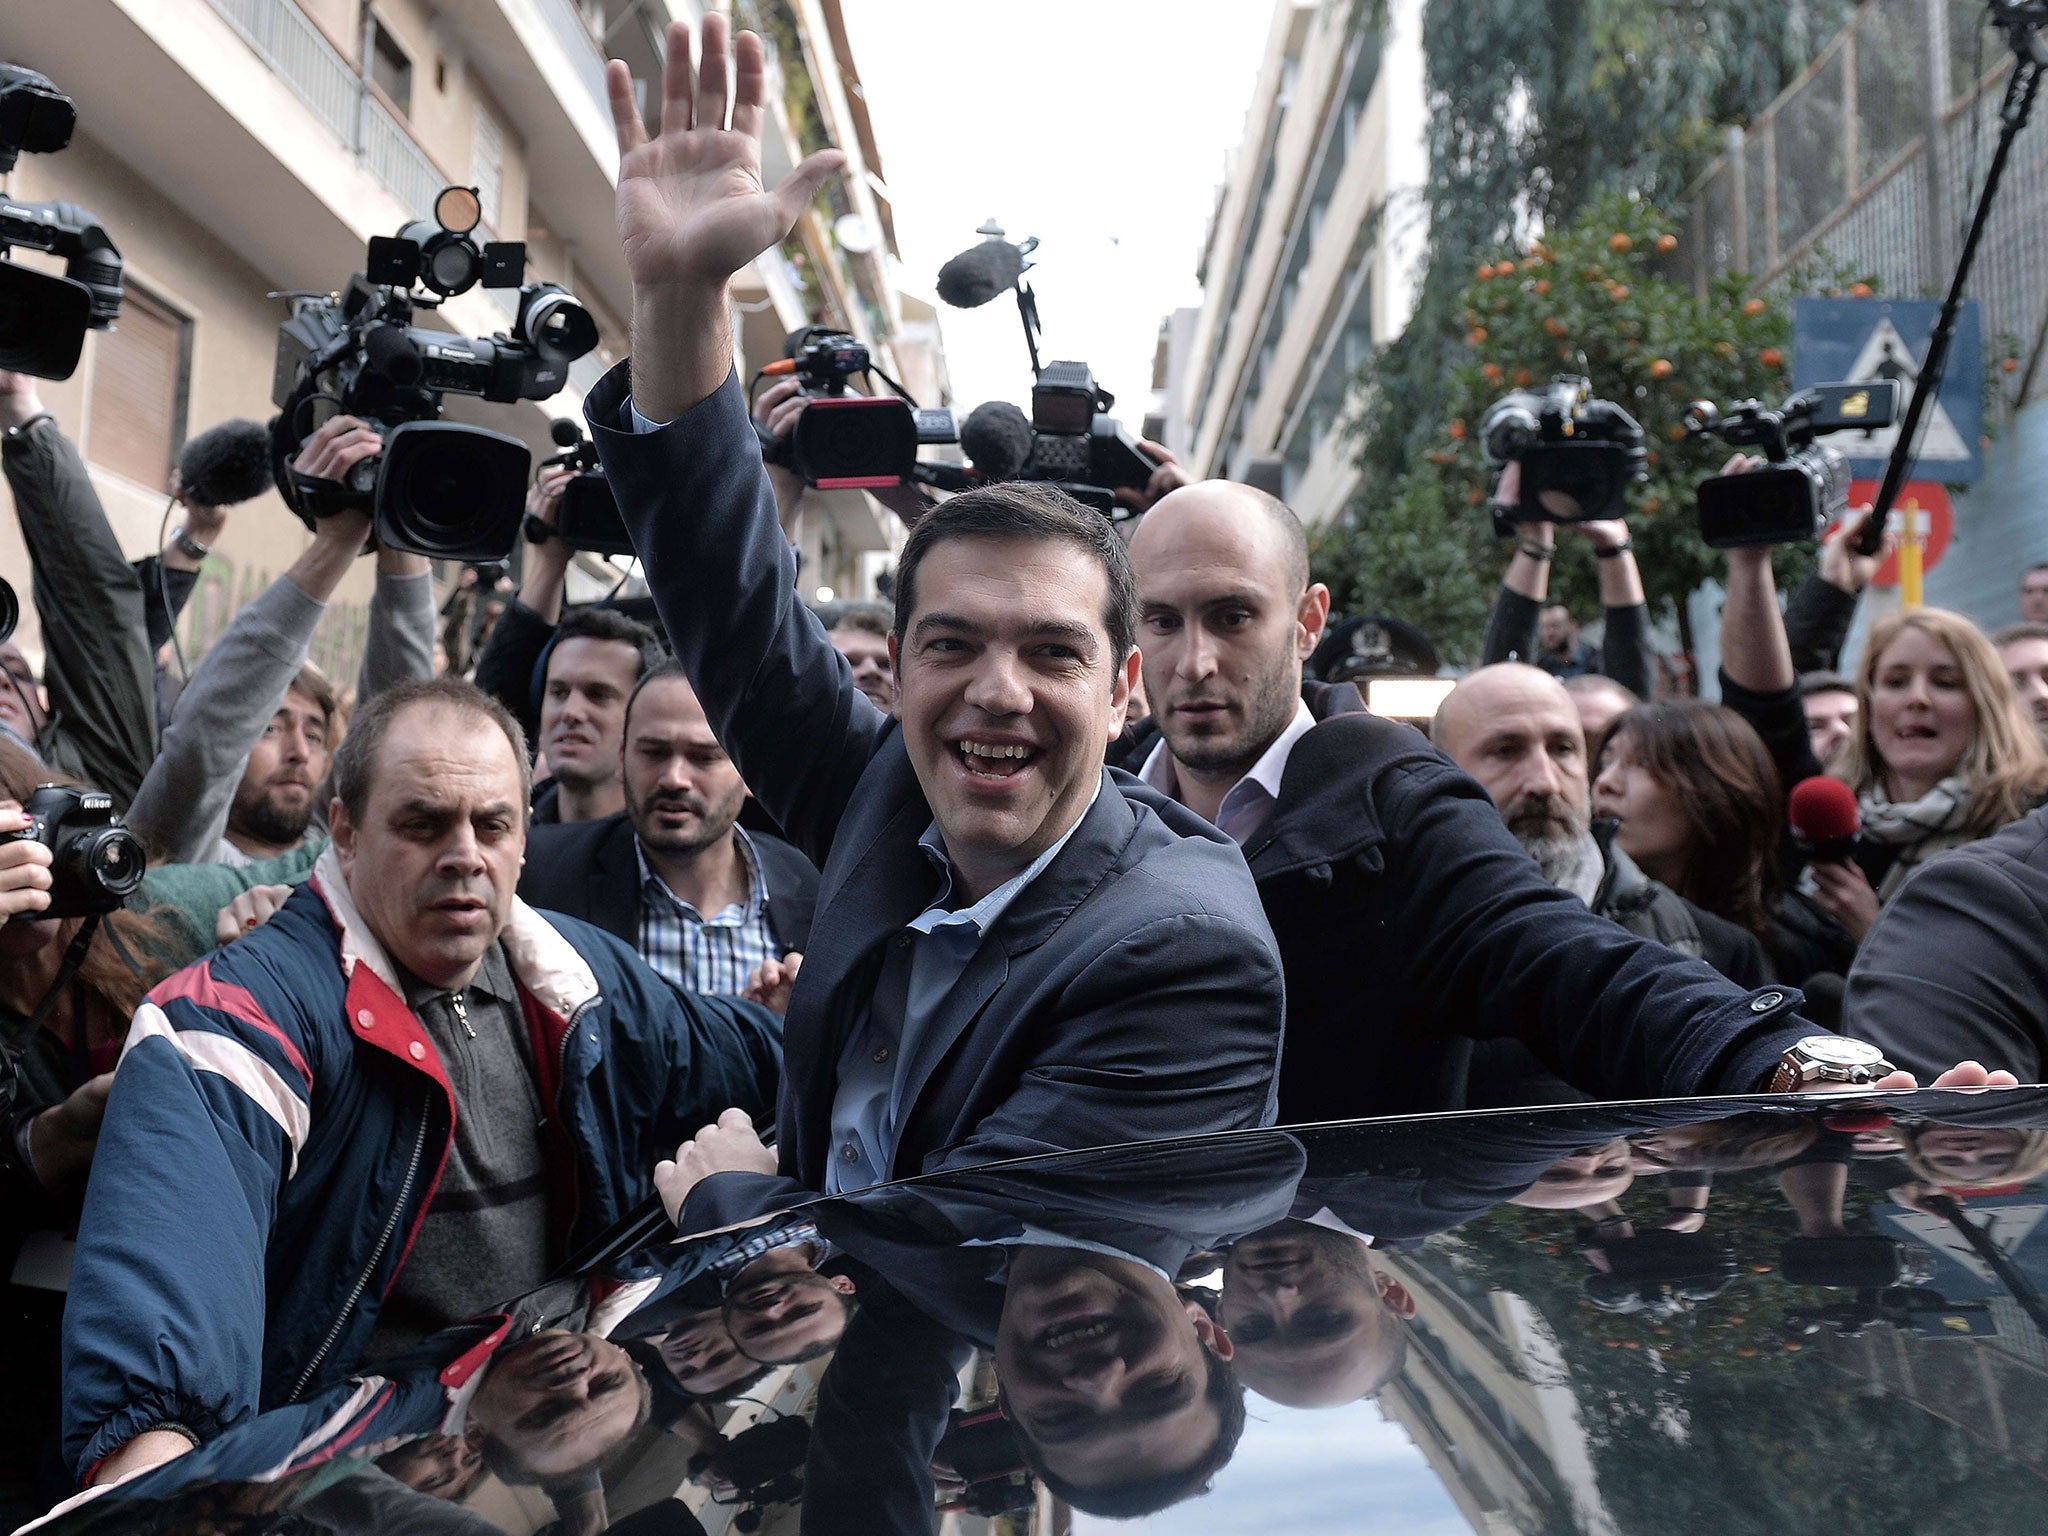 The coalition led by Prime Minister Alexis Tsipras capitalised on anti-austerity sentiment austerity measures